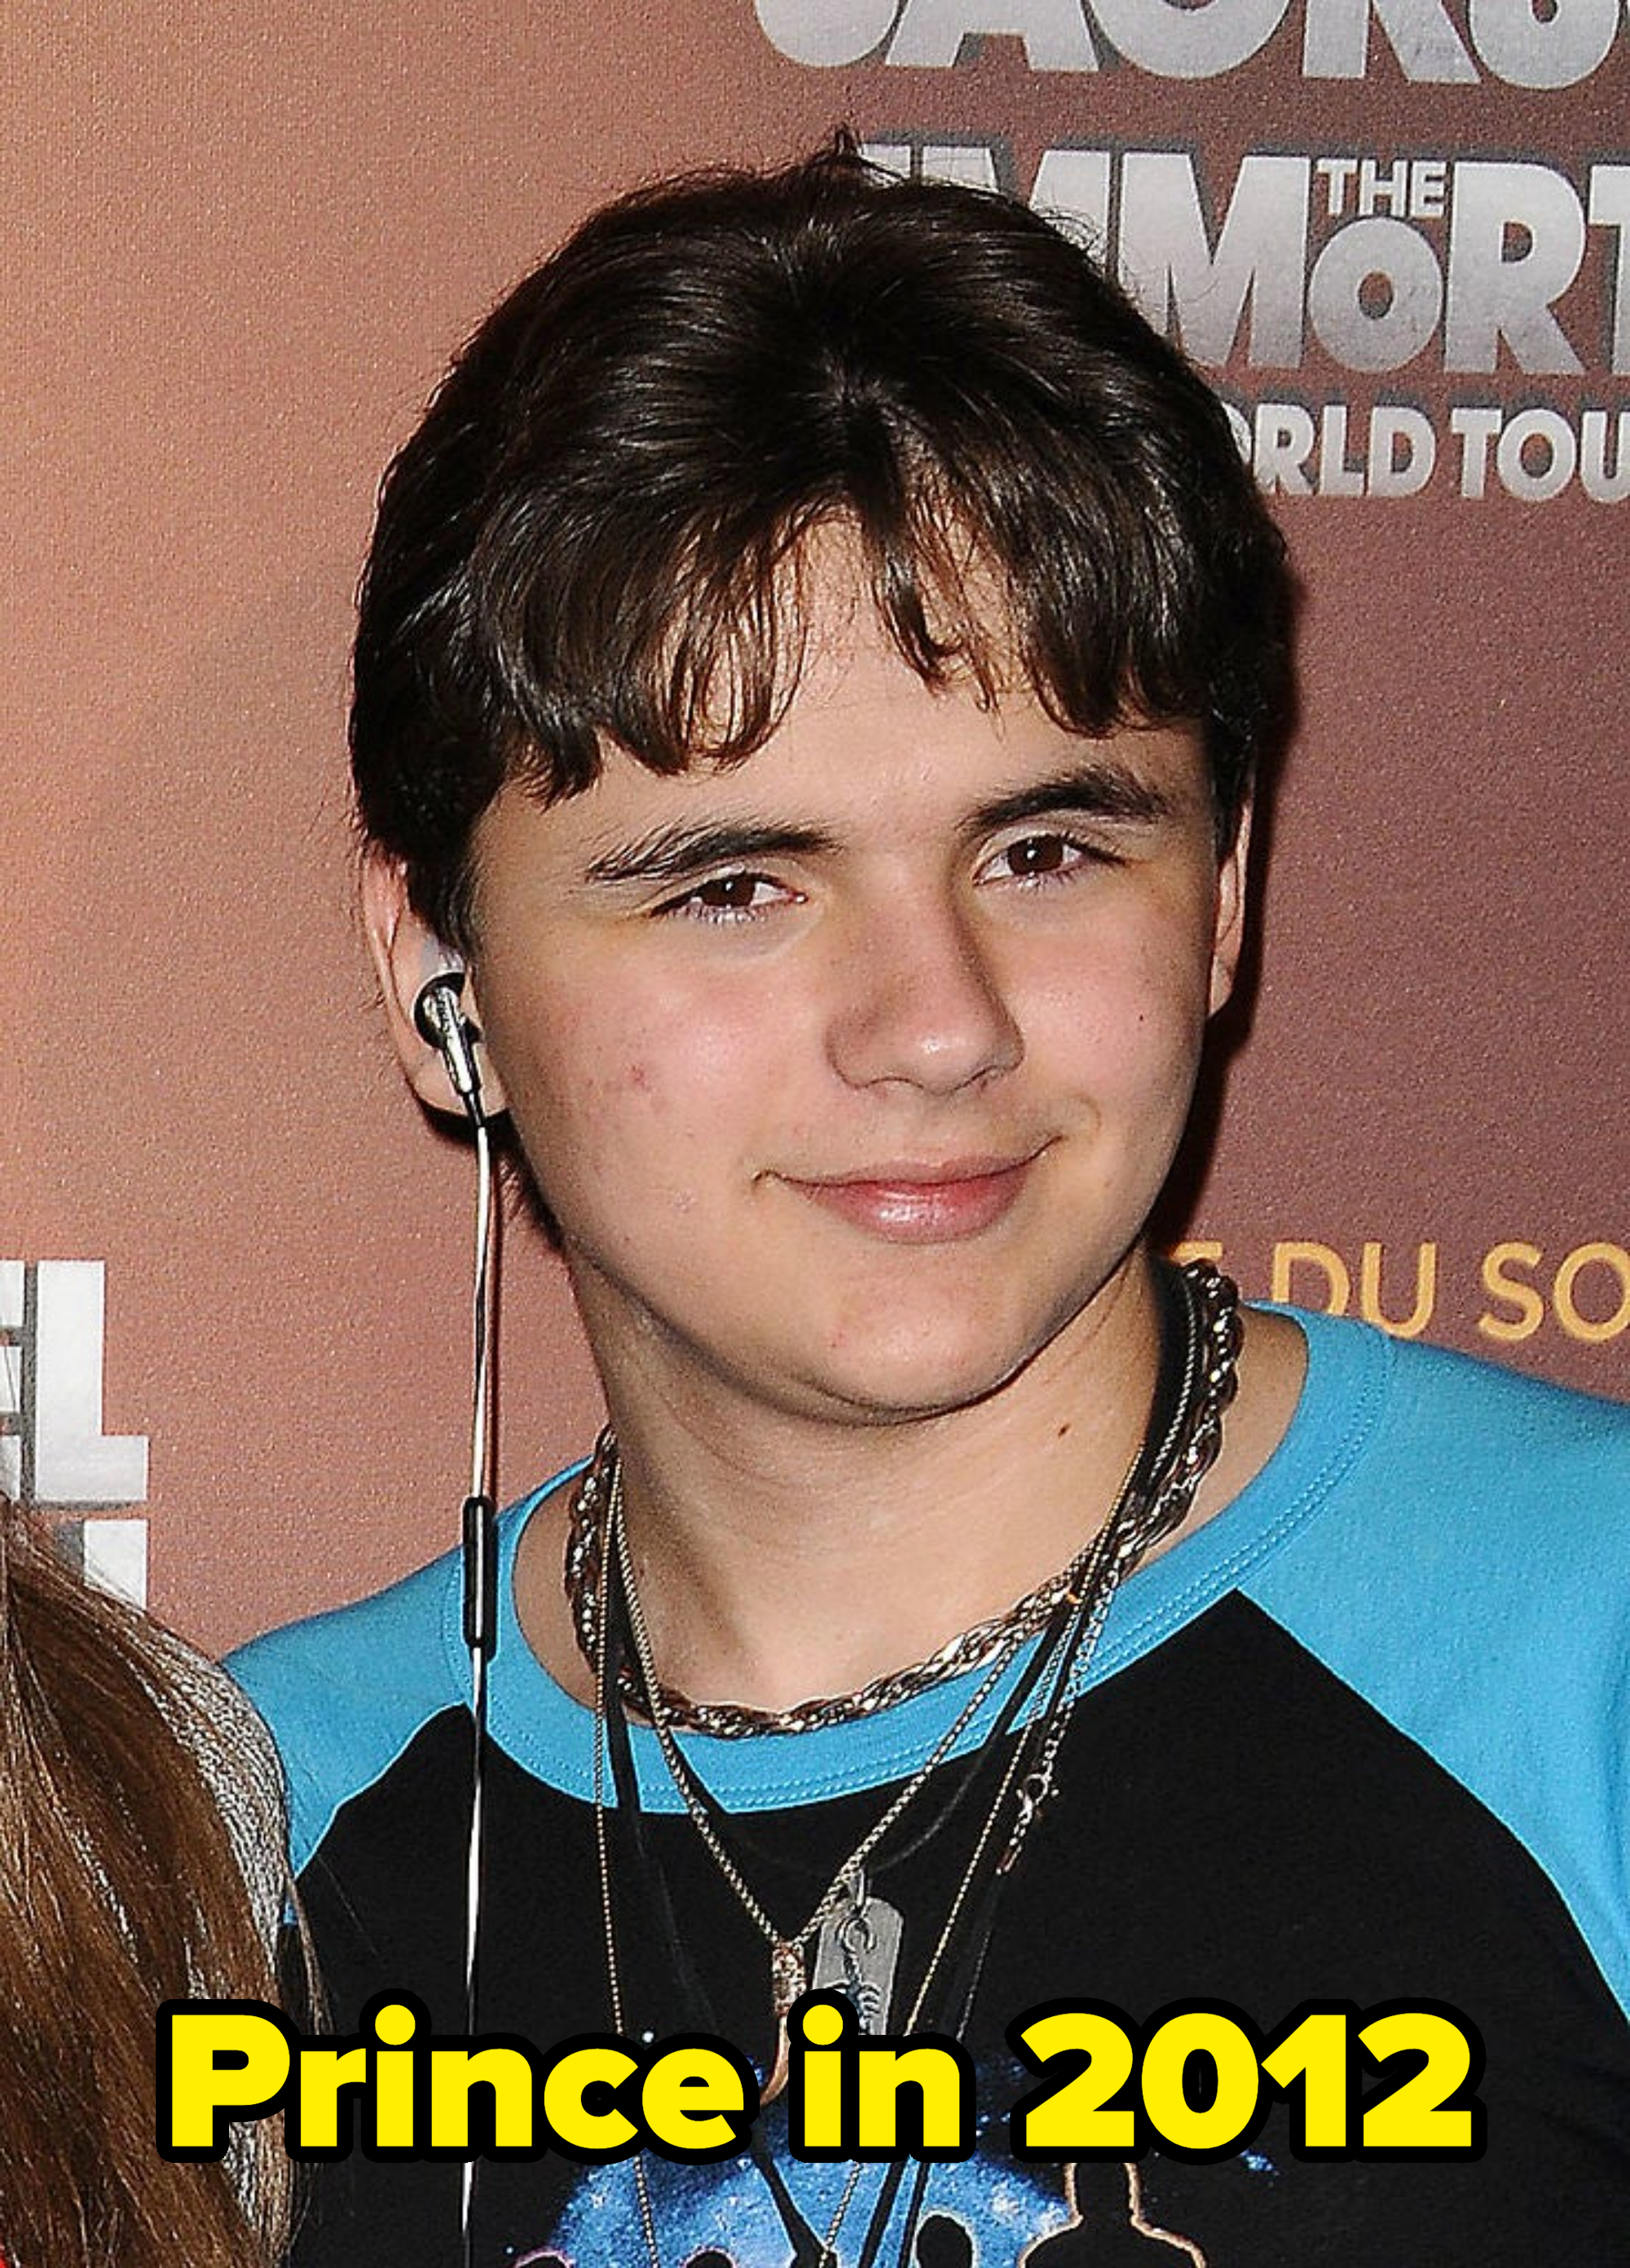 Young person with headphones around neck wearing a graphic t-shirt and a necklace